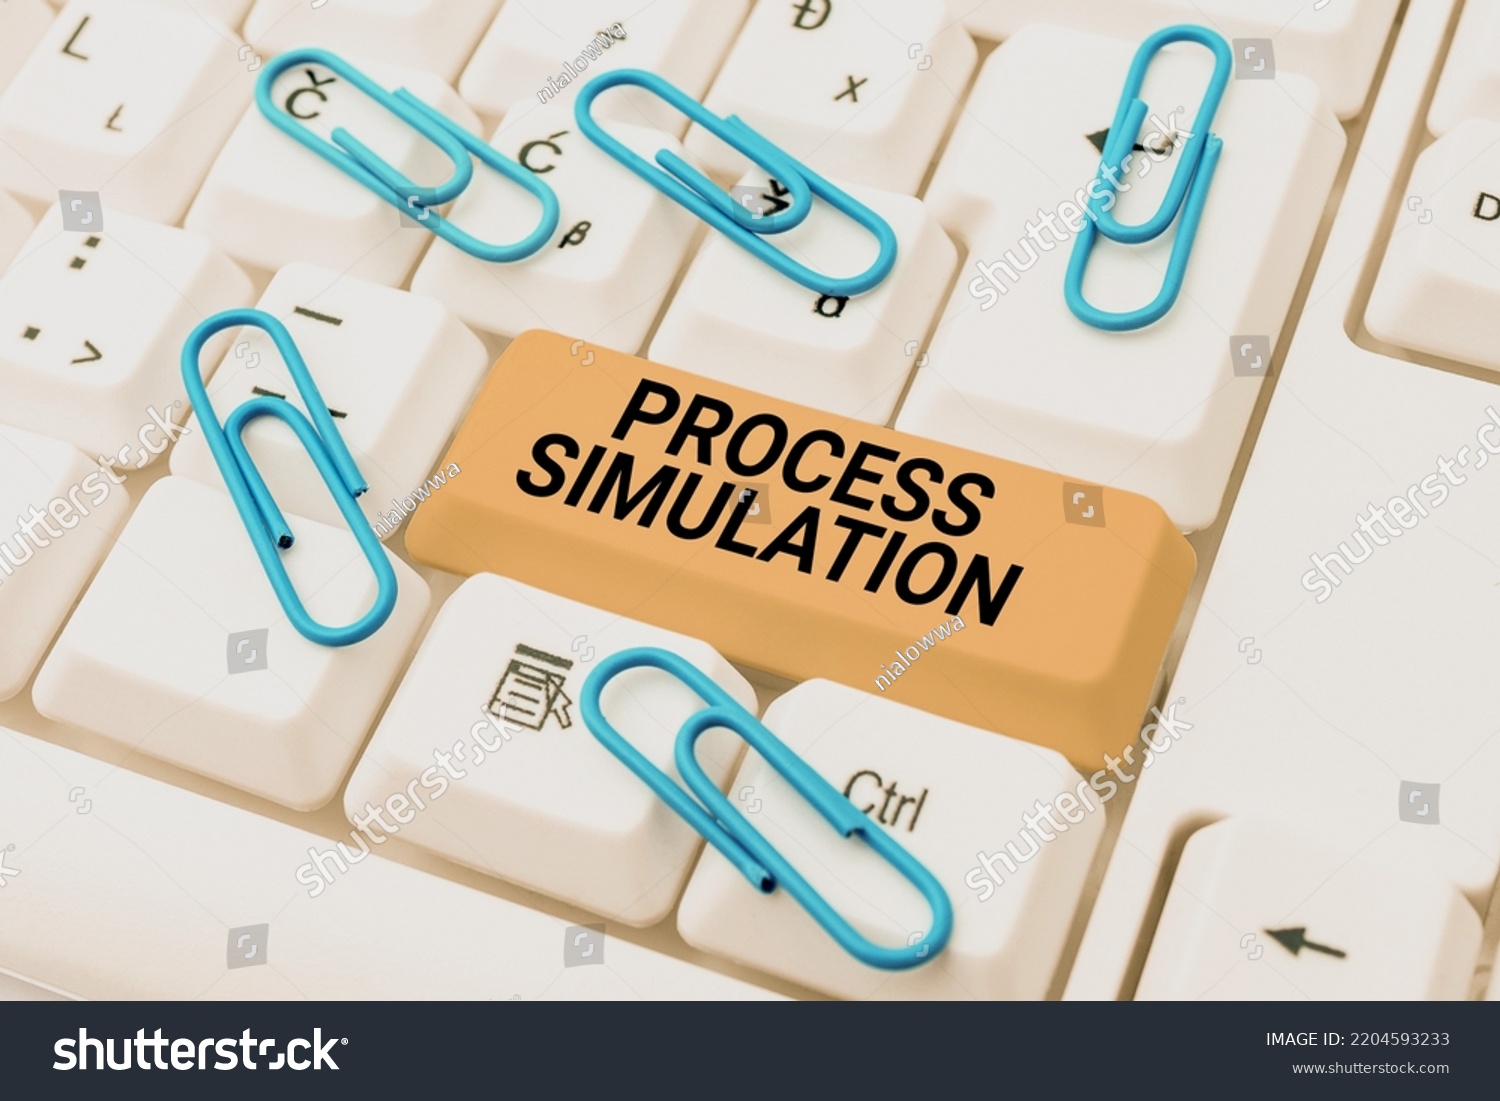 Text showing inspiration Process SimulationTechnical Representation Fabricated Study of a system. Word for Technical Representation Fabricated Study of a system #2204593233